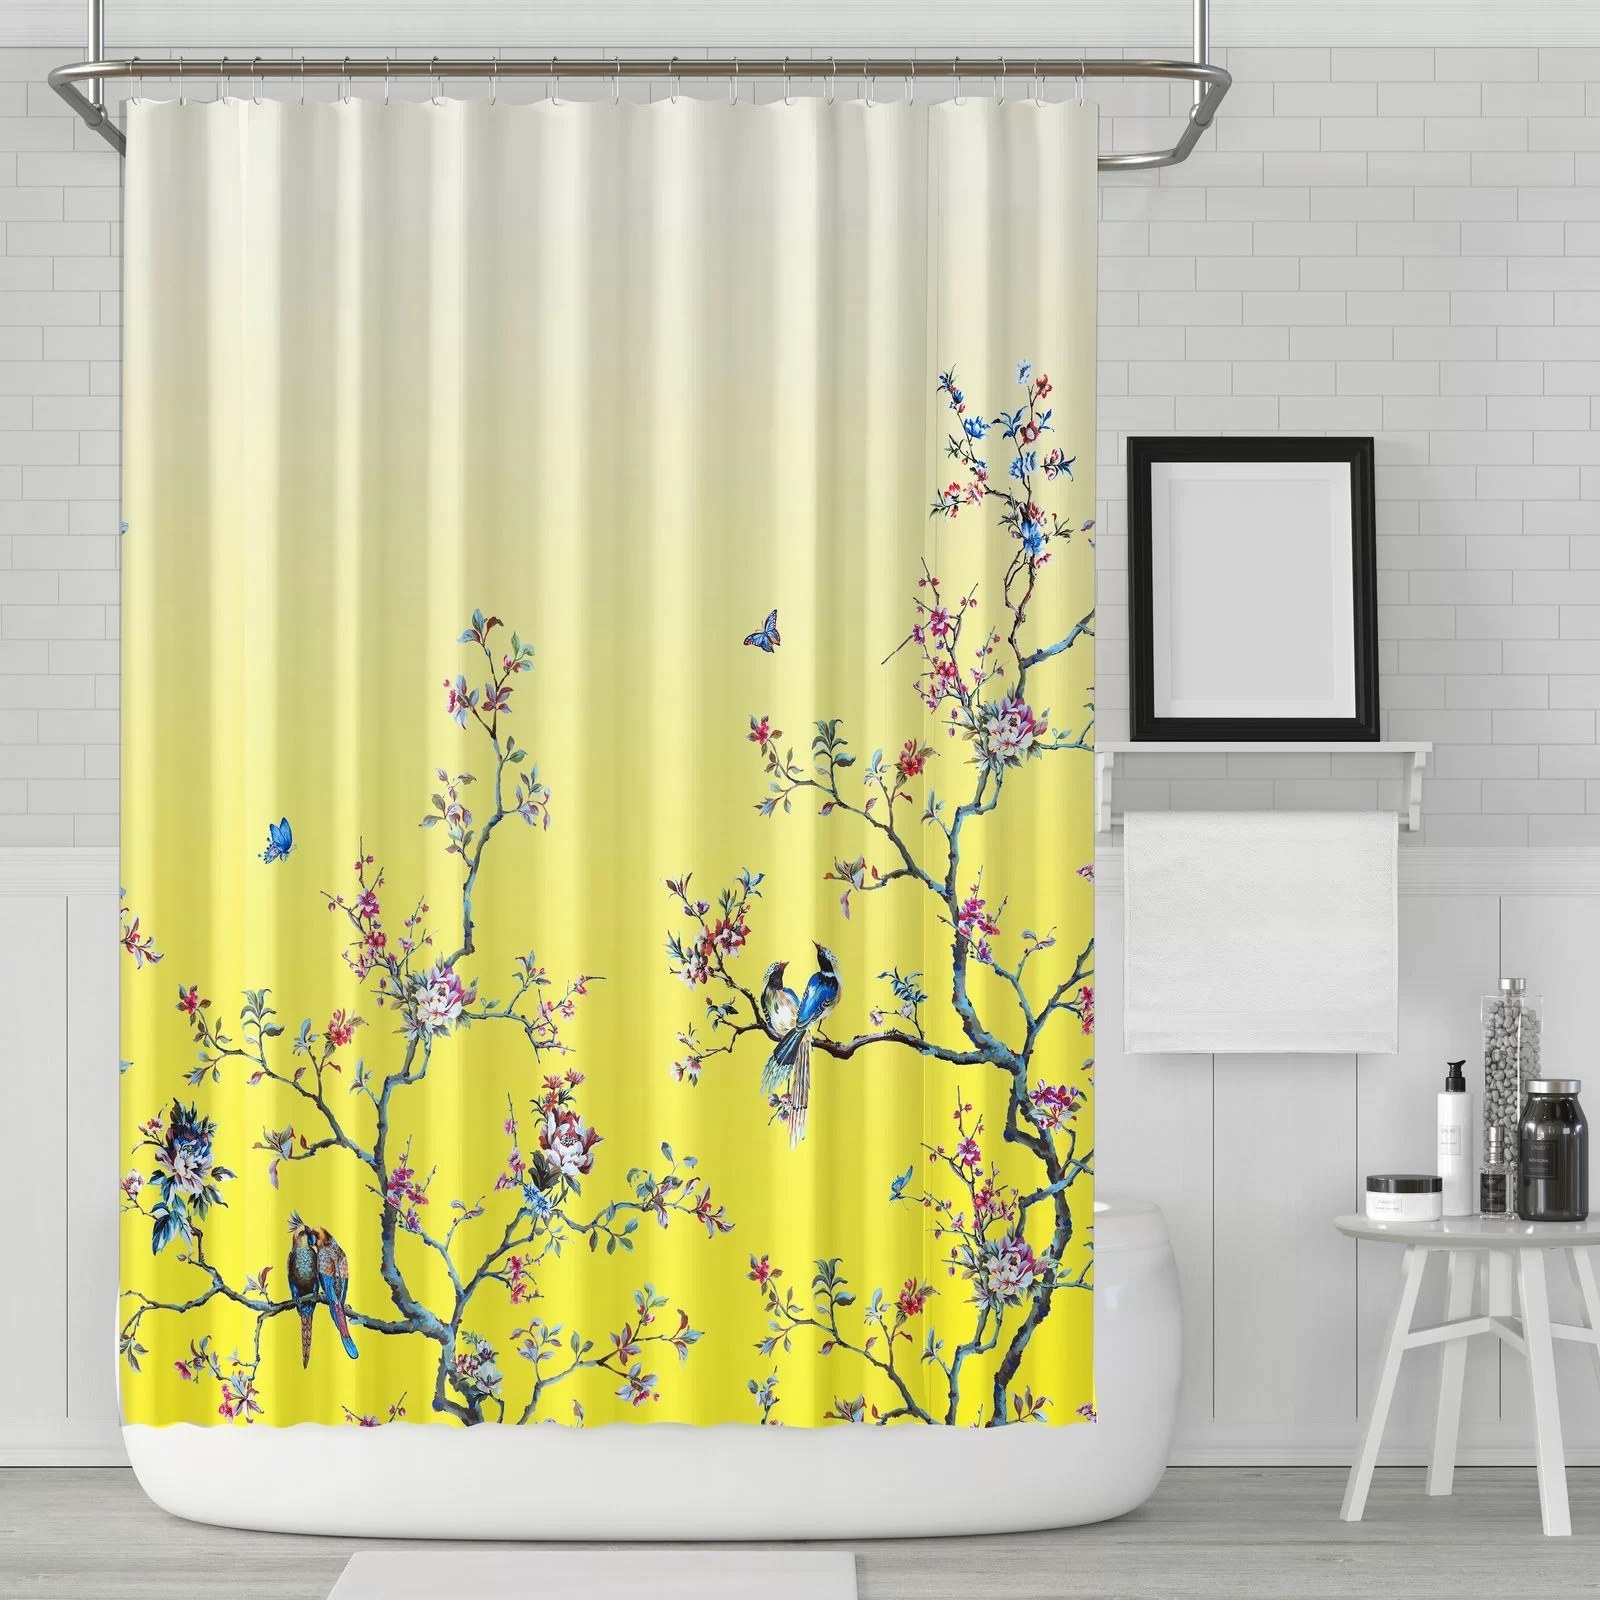 a shower curtain with bird and tree design